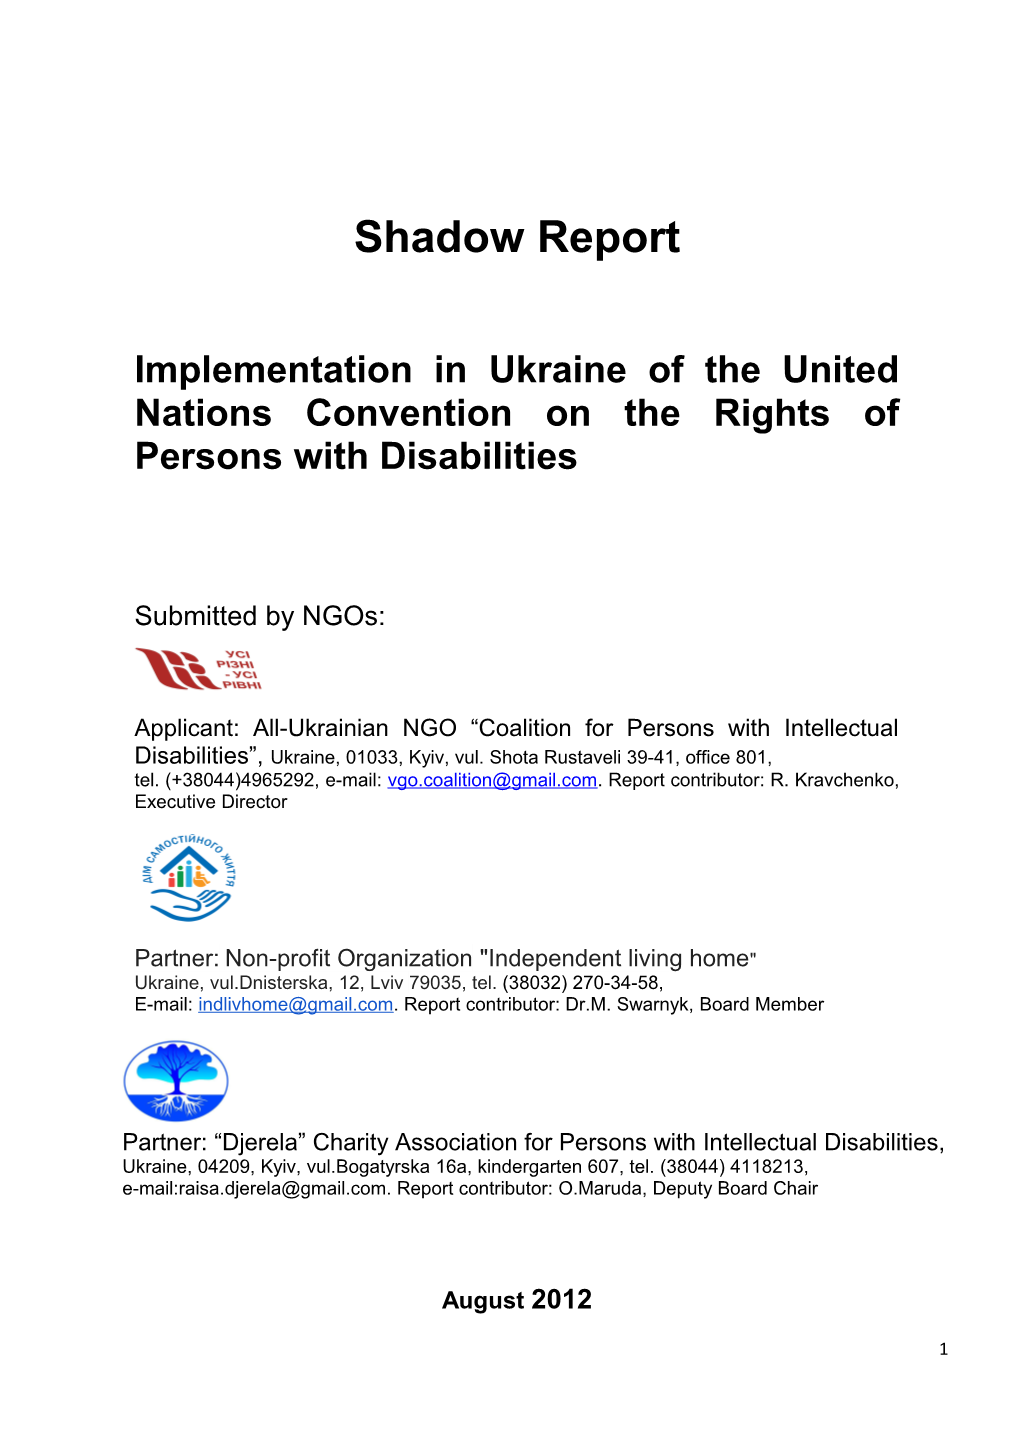 Implementation in Ukraine of the United Nations Convention on the Rights of Persons With